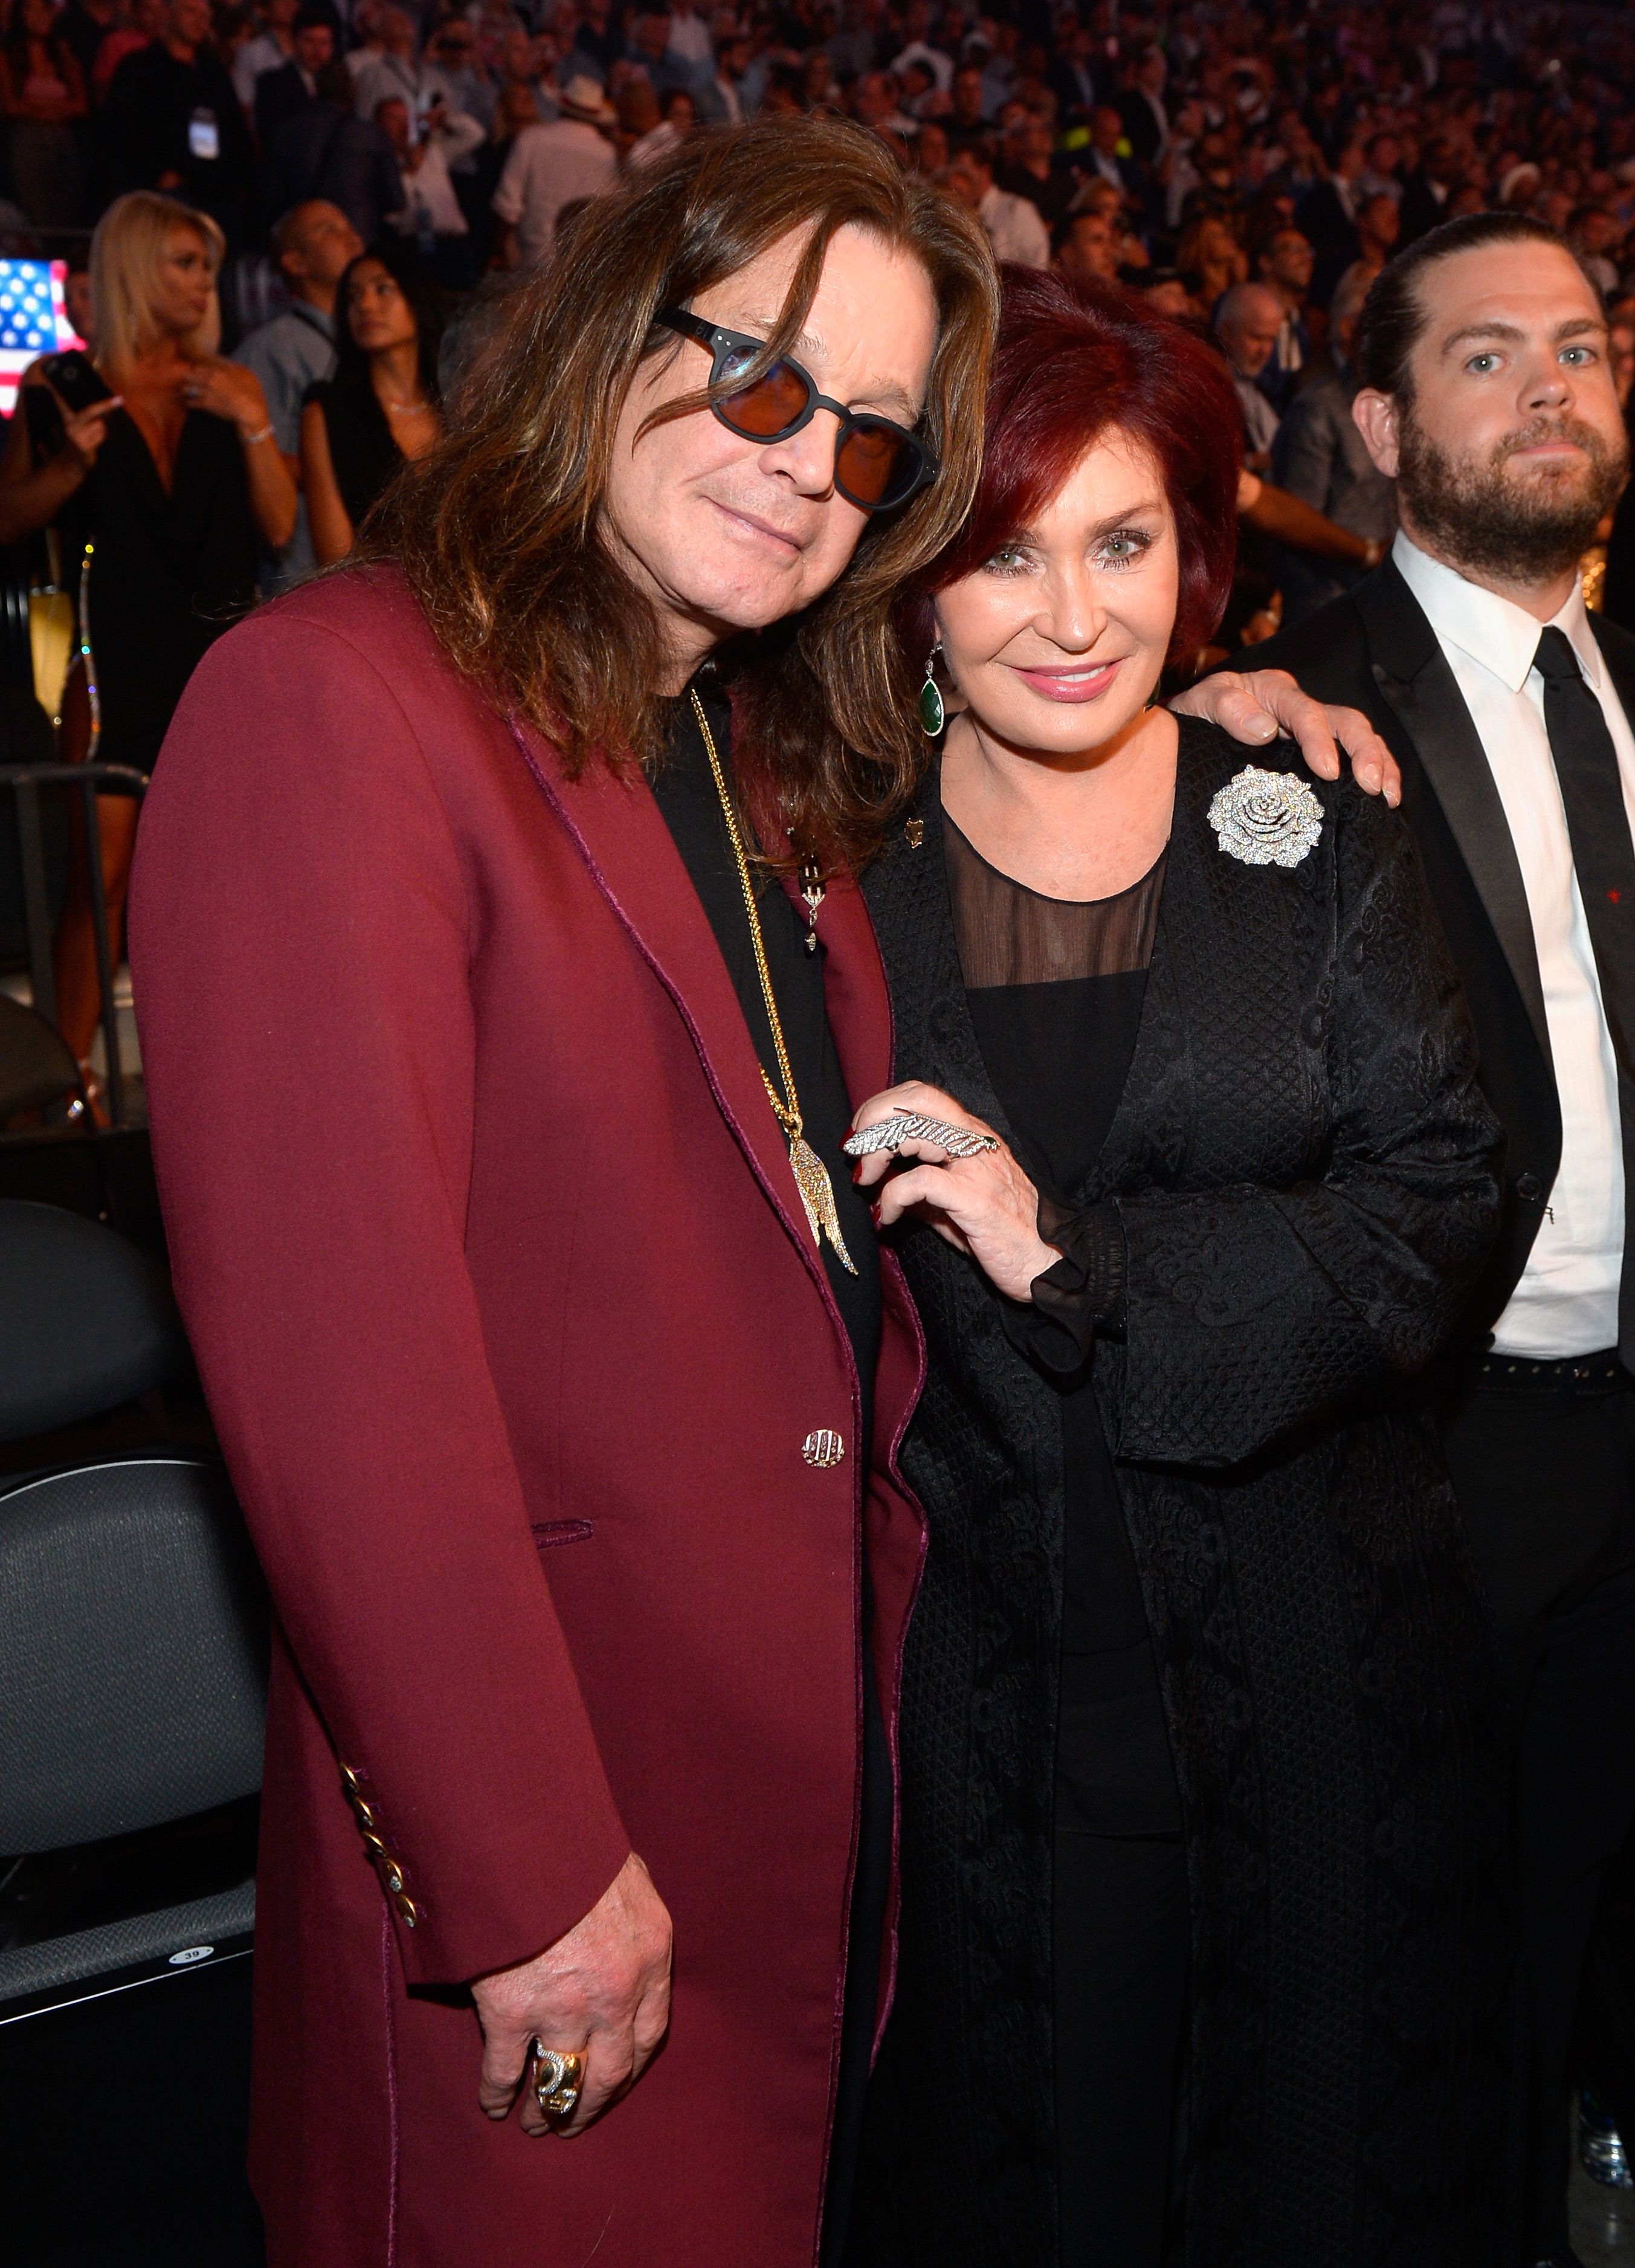 Singer Ozzy Osbourne and Sharon Osbourne at the Showtime, WME IME and Mayweather Promotions VIP Pre-Fight party for Mayweather vs. McGregor at T-Mobile Arena on August 26, 2017 | Photo: Getty Images